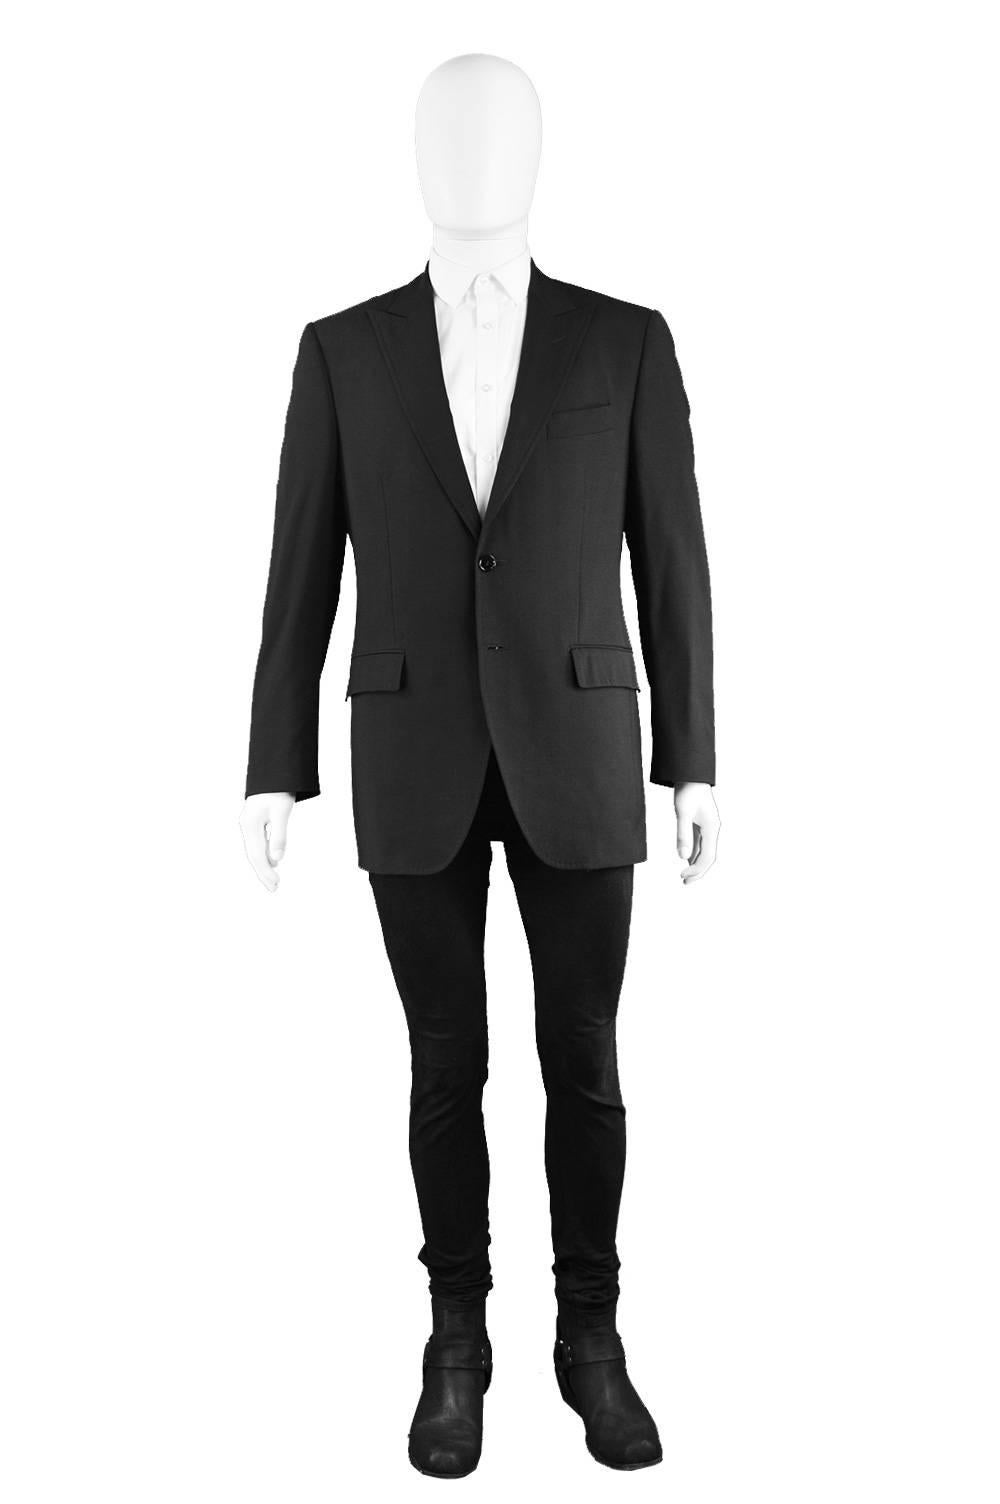 A classic men's blazer or dinner jacket by luxury Italian designers, Dolce & Gabbana for their mens mainline, circa A/W 2005. With peak lapels, flap pockets and in a classic black wool with 